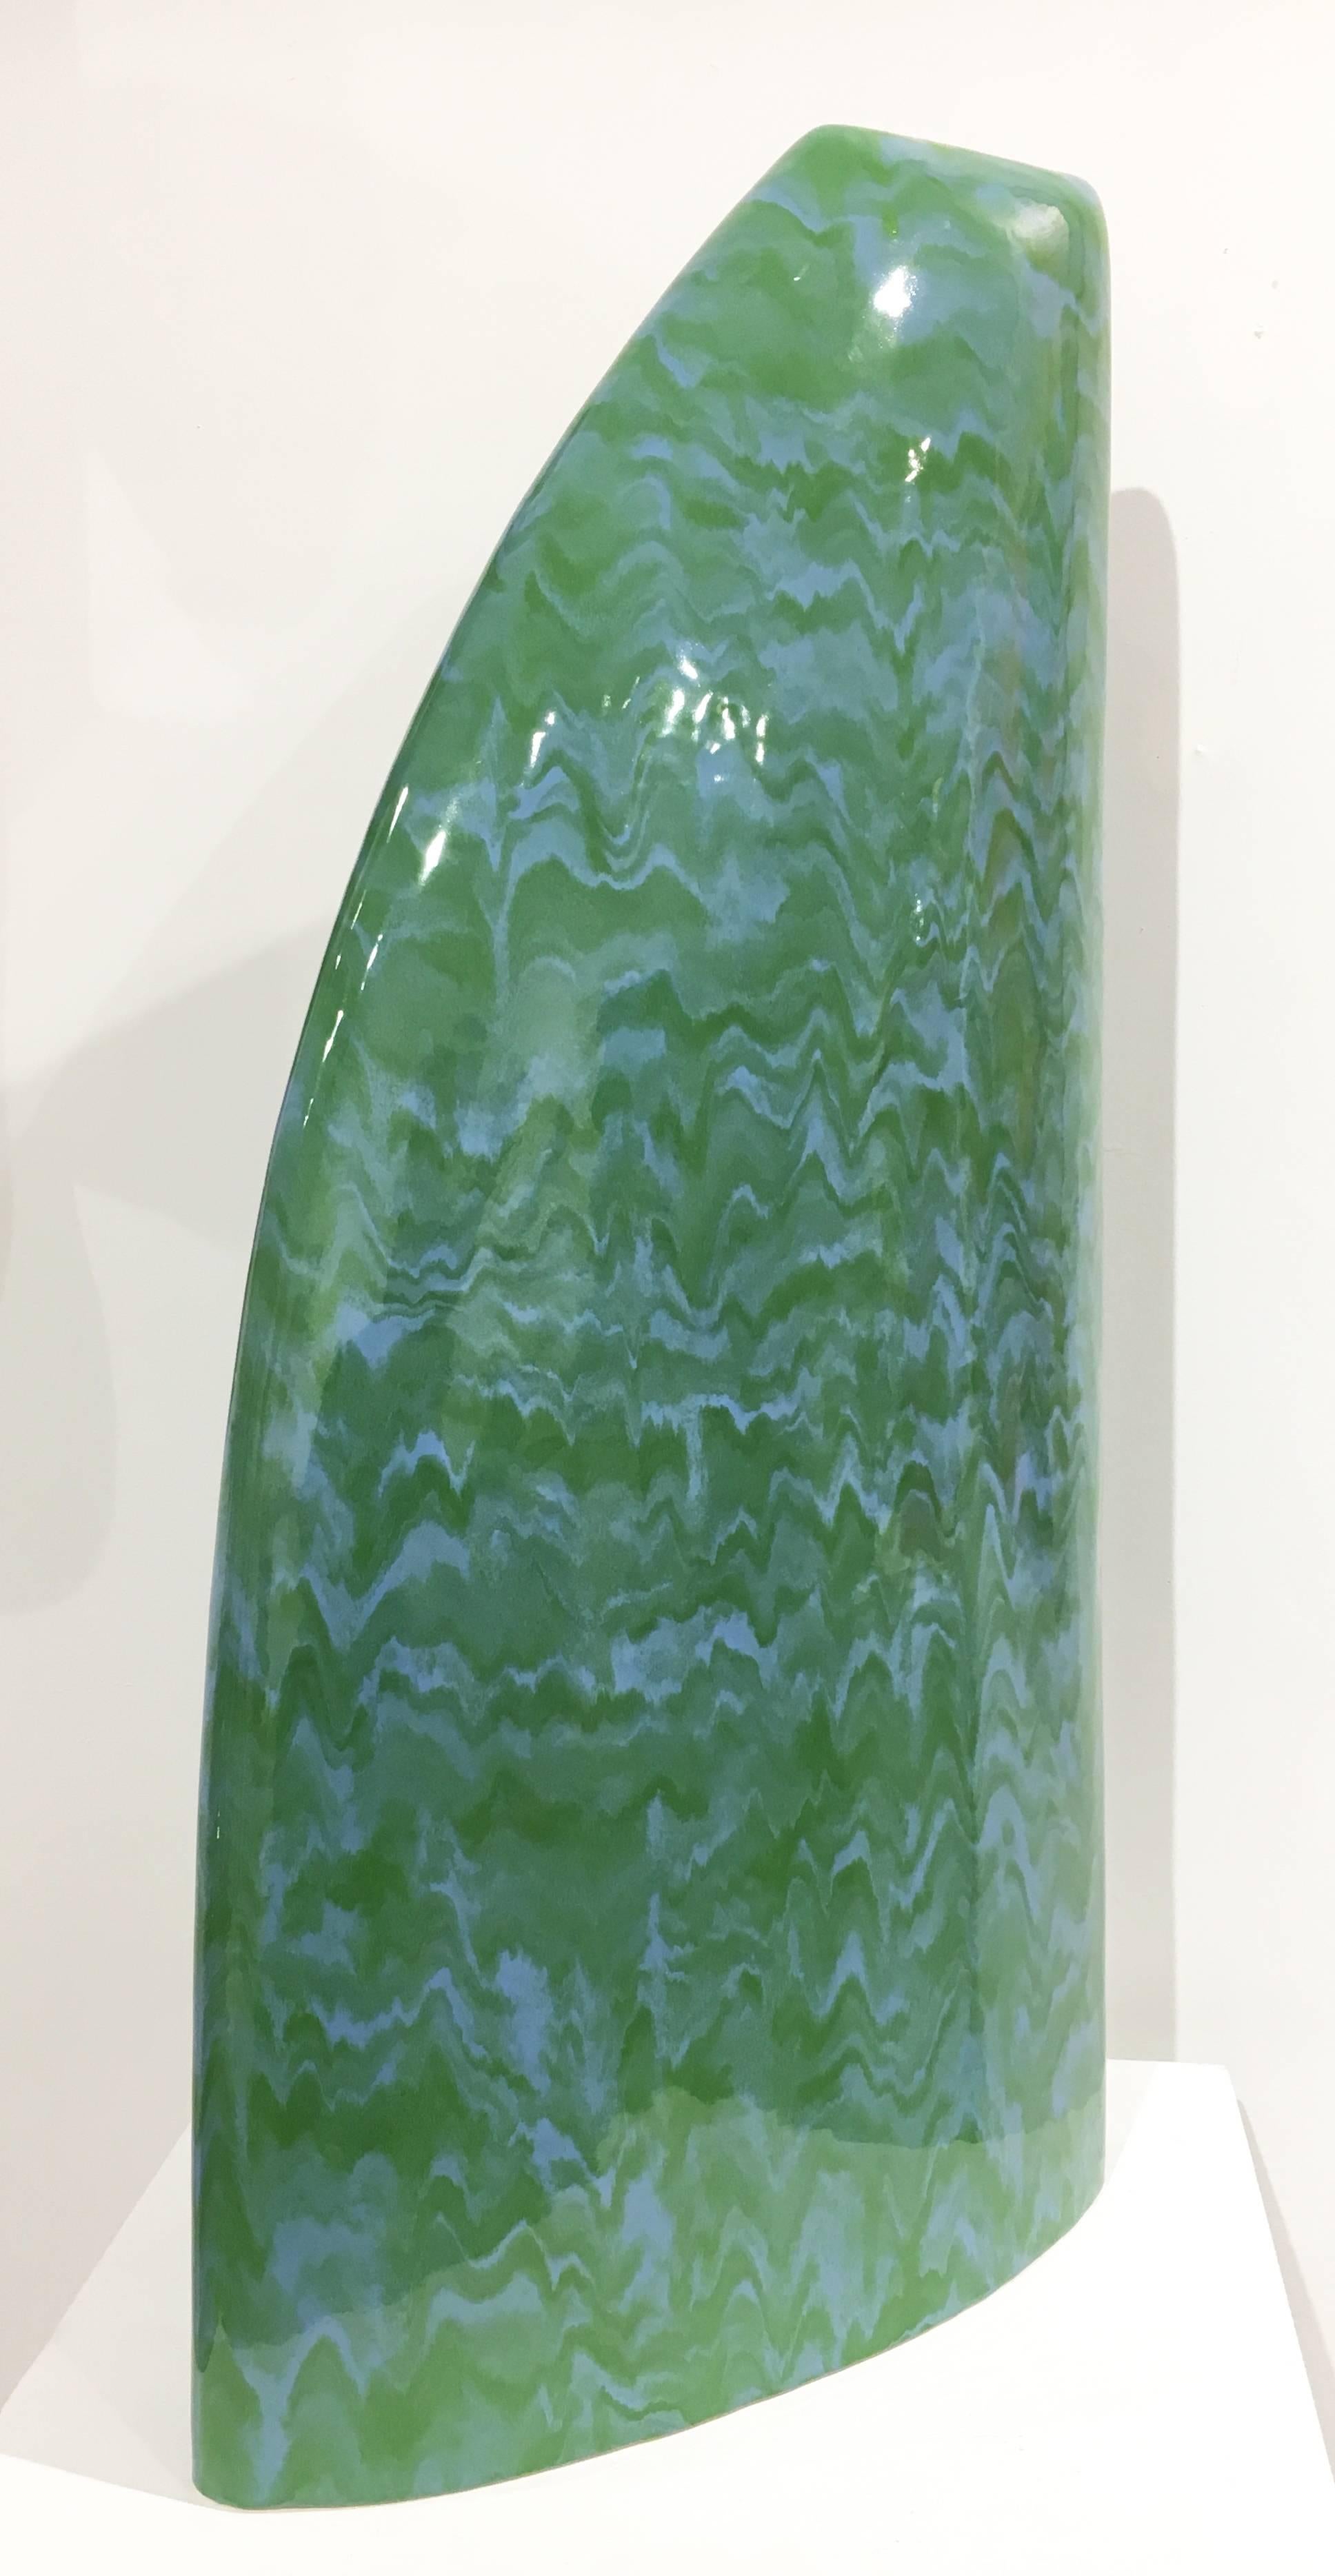 James Marshall Abstract Sculpture - Minimalist Abstract Ceramic Sculpture with Cascading Blue and Green Glaze